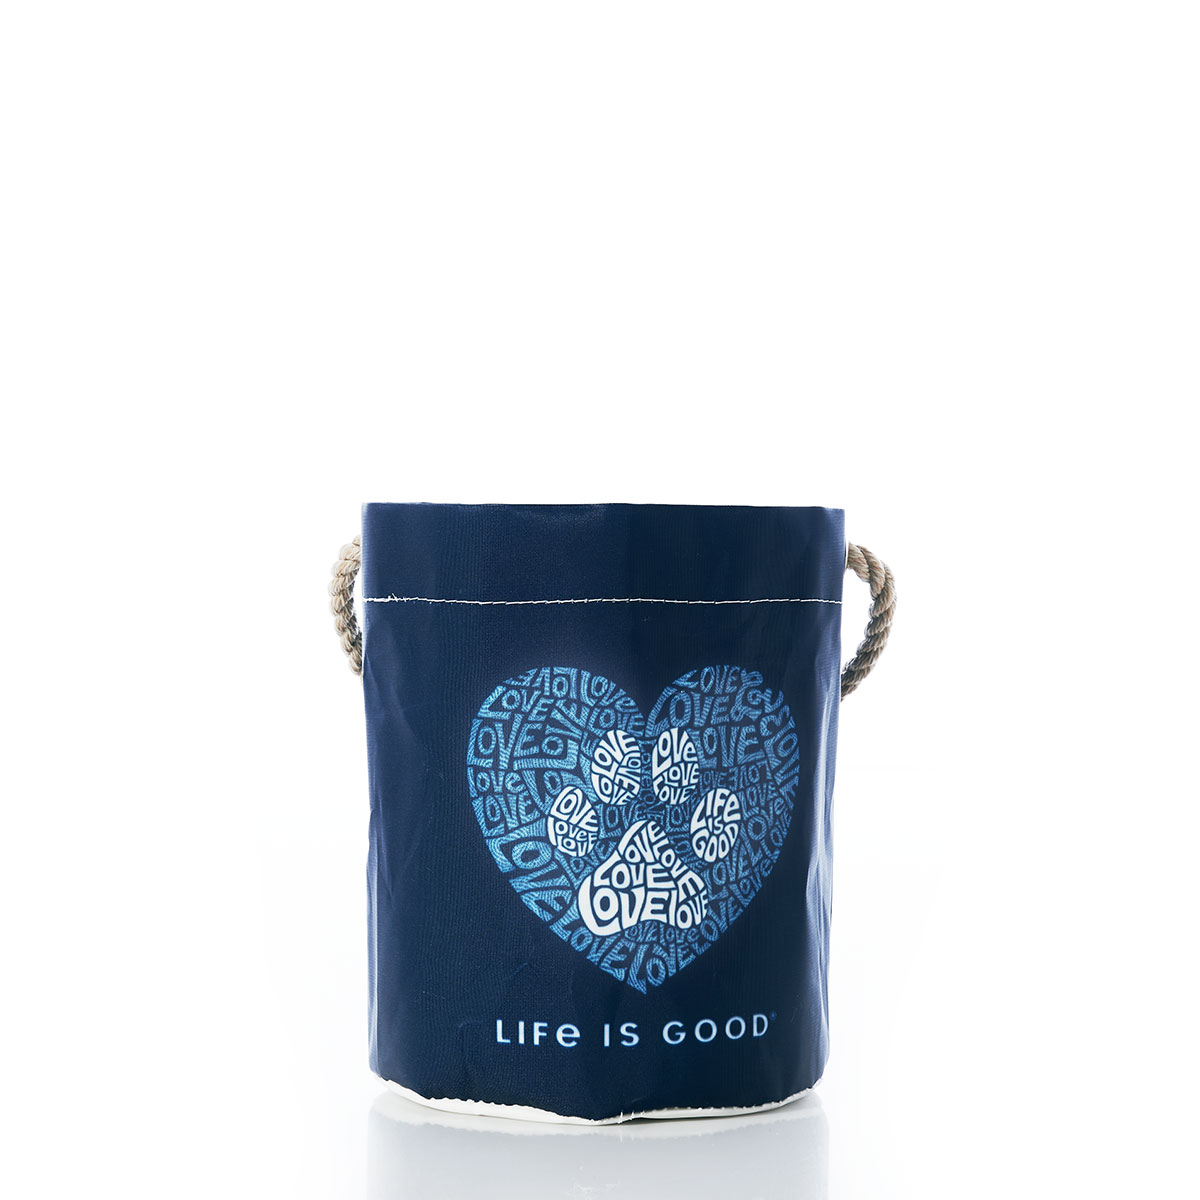 white paw print made of words inside light blue heart print made of words on navy recycled sail cloth bucket with hemp rope handle